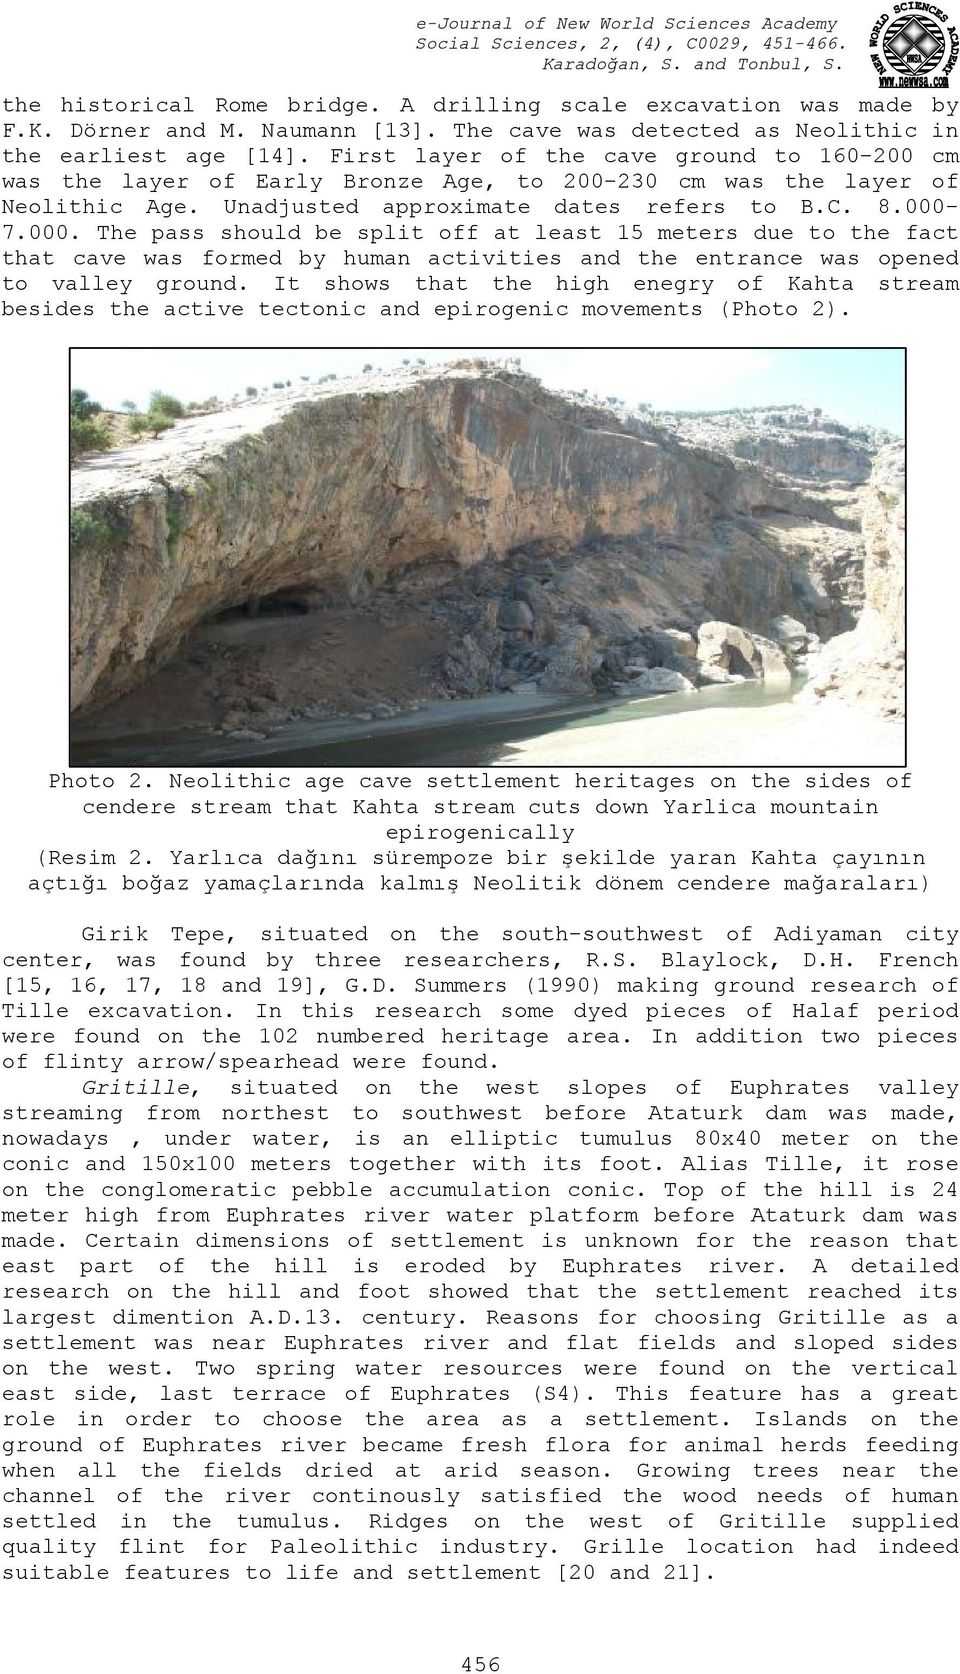 7.000. The pass should be split off at least 15 meters due to the fact that cave was formed by human activities and the entrance was opened to valley ground.